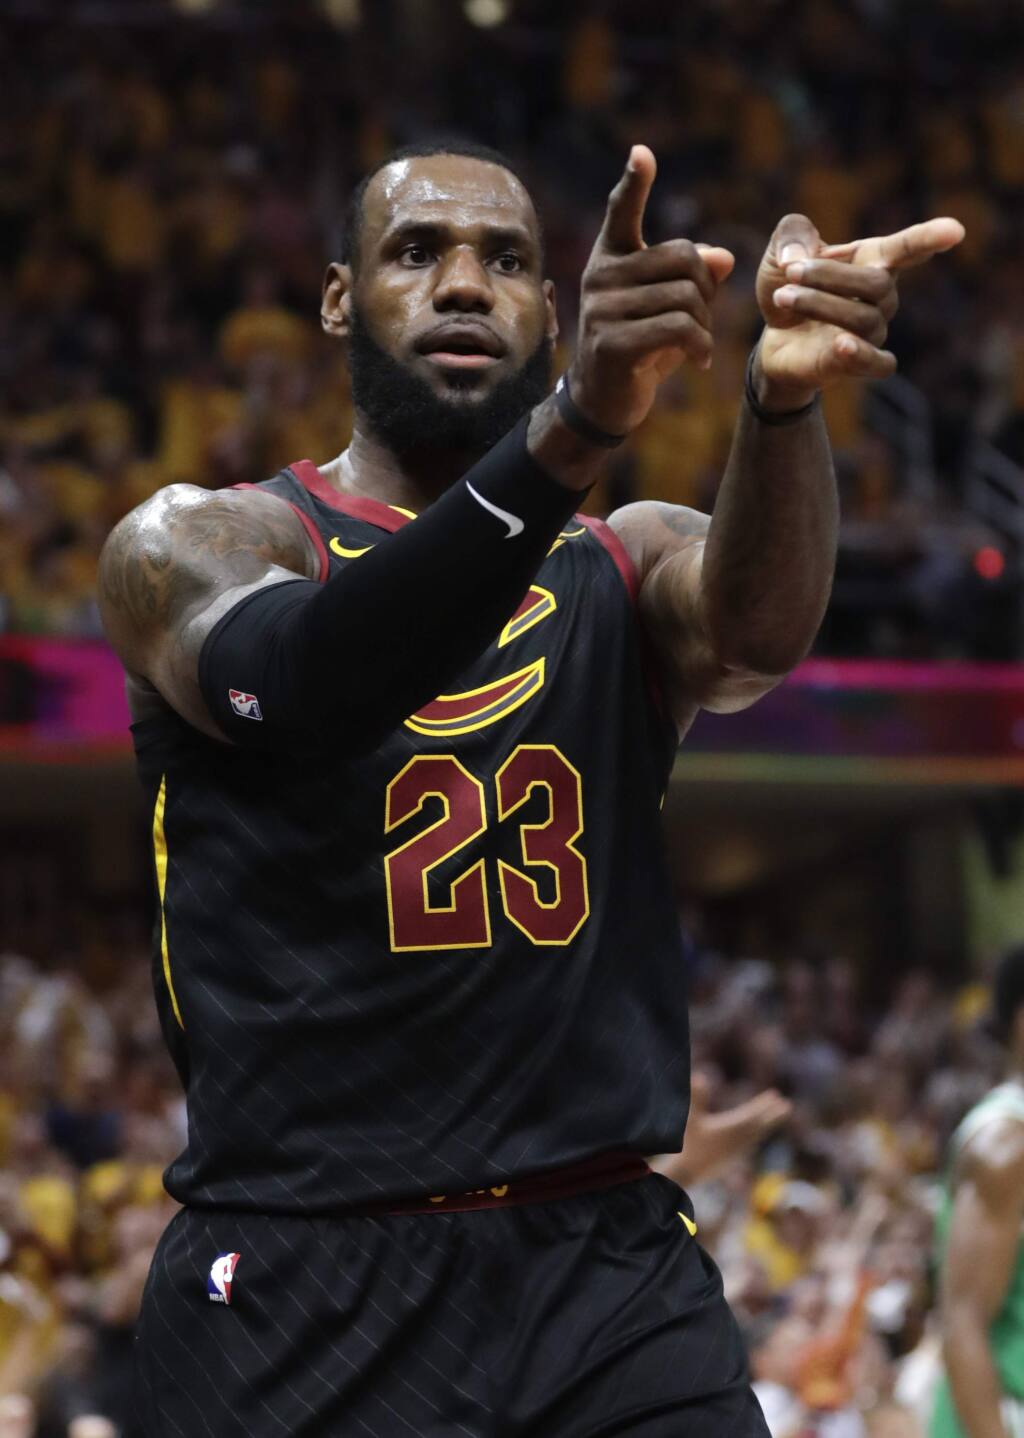 NBA roundup: Two Cavs top 40 points in OT win at Boston, LeBron James  claims record